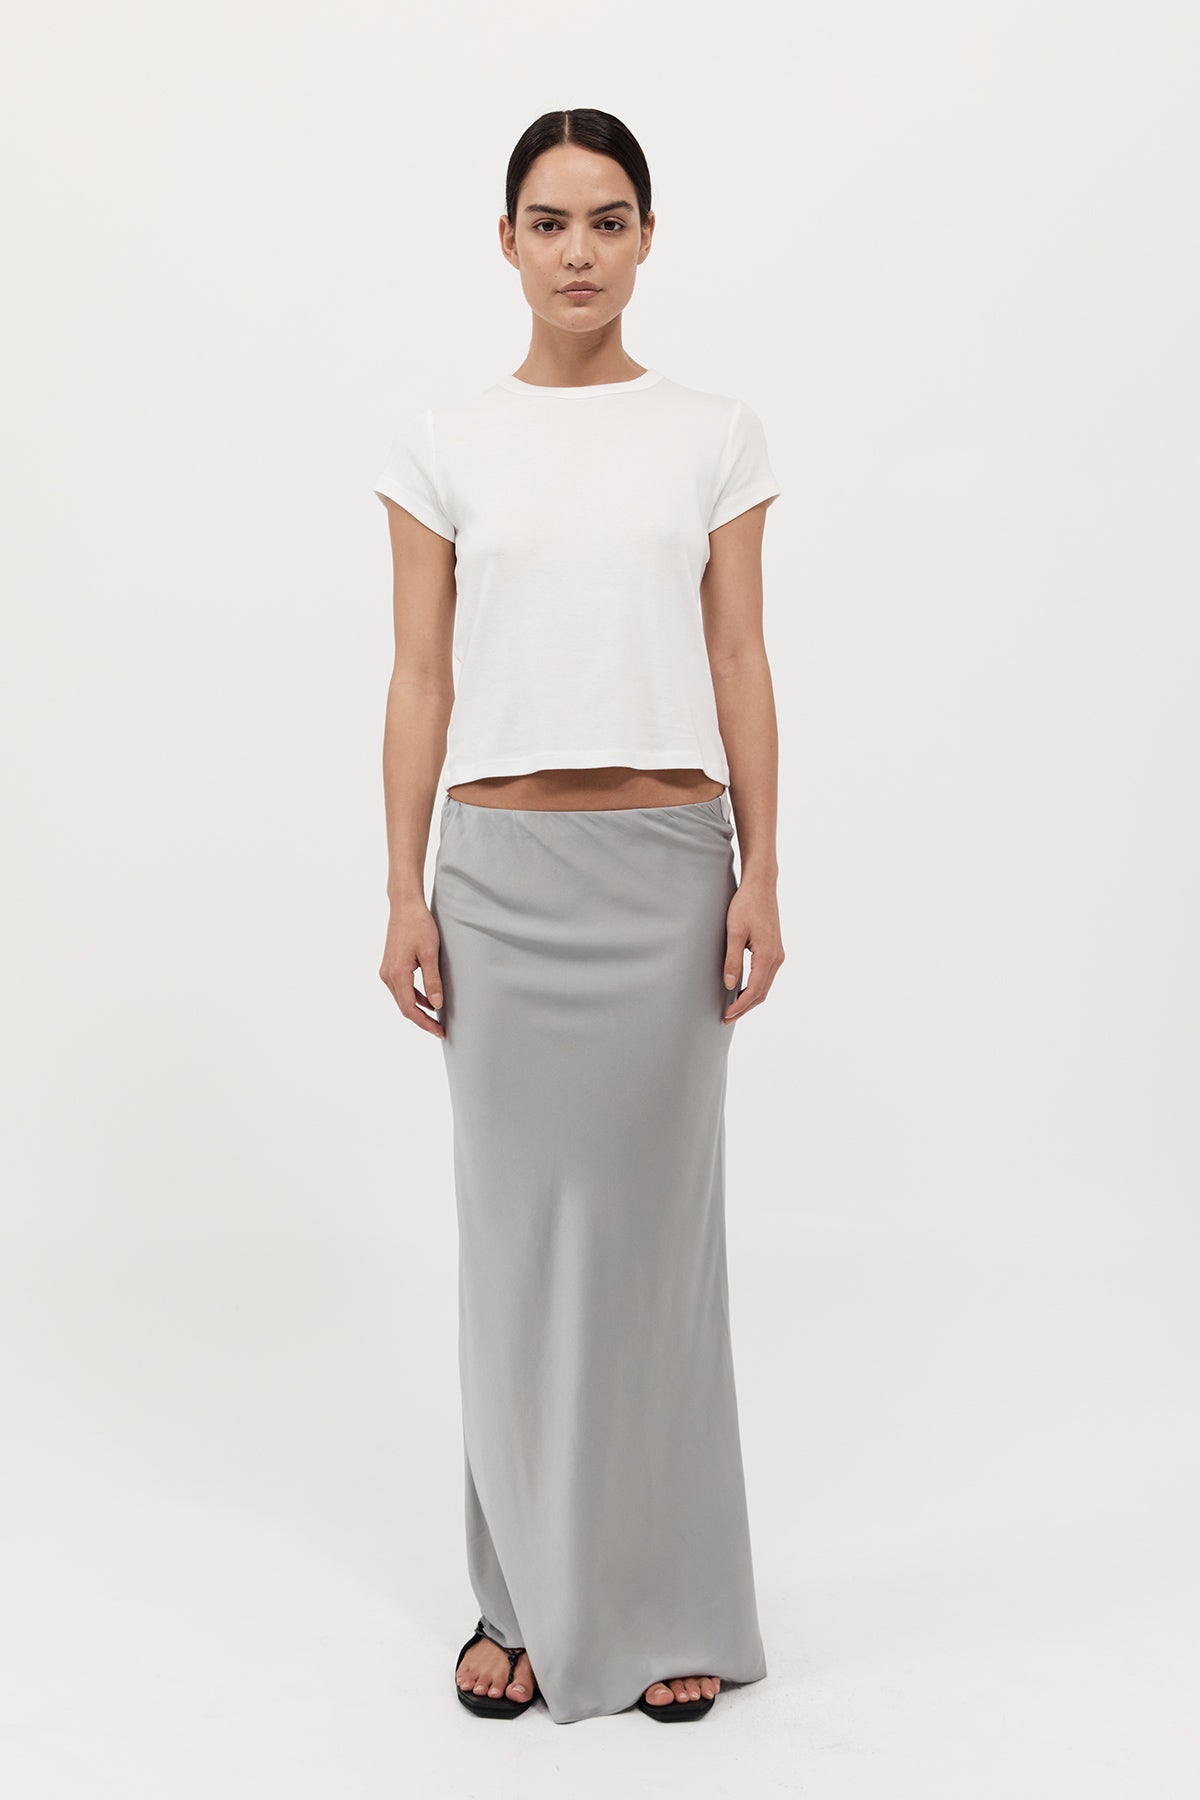 The St Agni Bias Slip Skirt in Silver available at The New Trend Australia